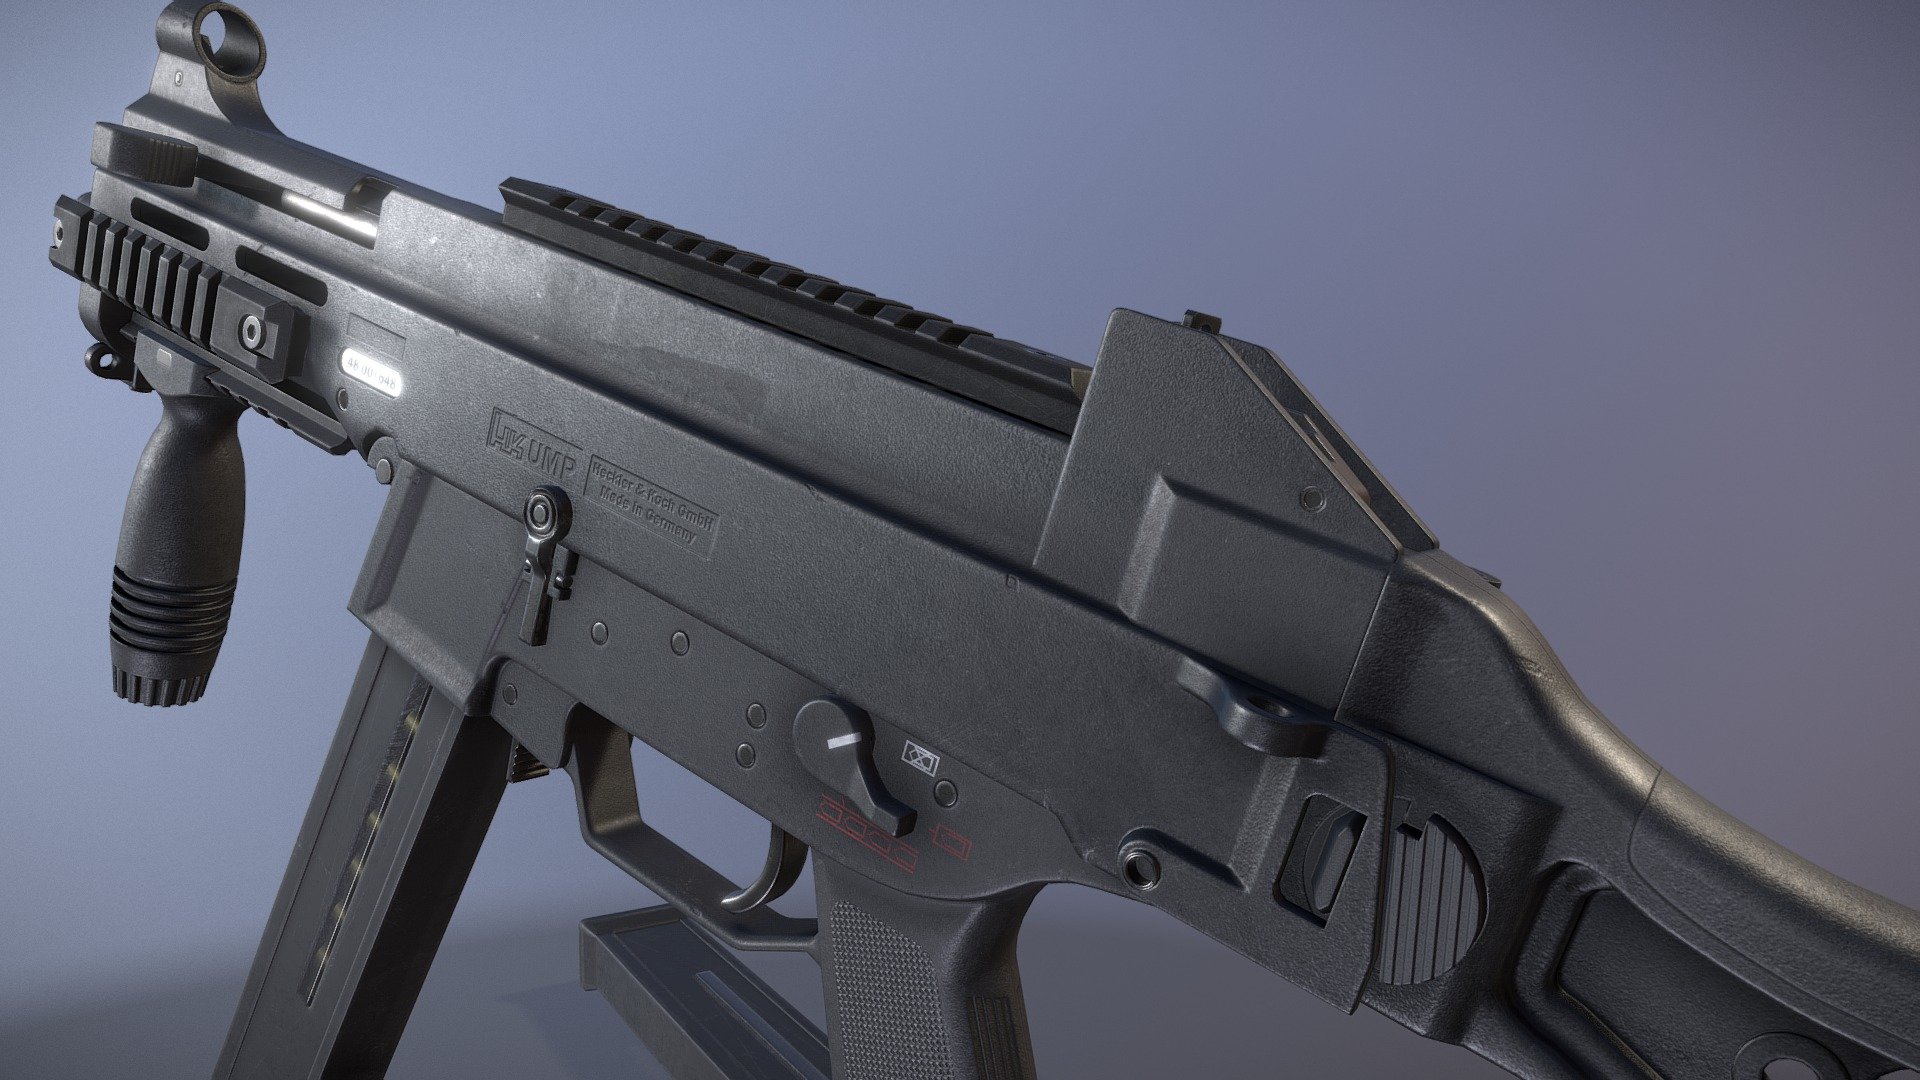 Game-ready UMP submachine gun.

Originally modeled in 3ds Max 2018. Download includes .max, .fbx, .obj, metal/roughness PBR textures, specular/gloss PBR textures, textures for Unity and Unreal Engines, and additional texture maps such as curvature, AO, and color ID.

Model ready for animation. Movable parts include: bolt, fire selector, magazine, mag release, trigger, cocking handle, and stock. The stock is foldable.

Approximate dimensions: 68cm x 6cm x 33cm

Model is triangulated, no n-gons. A quaded version is included in the download. .45 ACP cartridge included 3d model